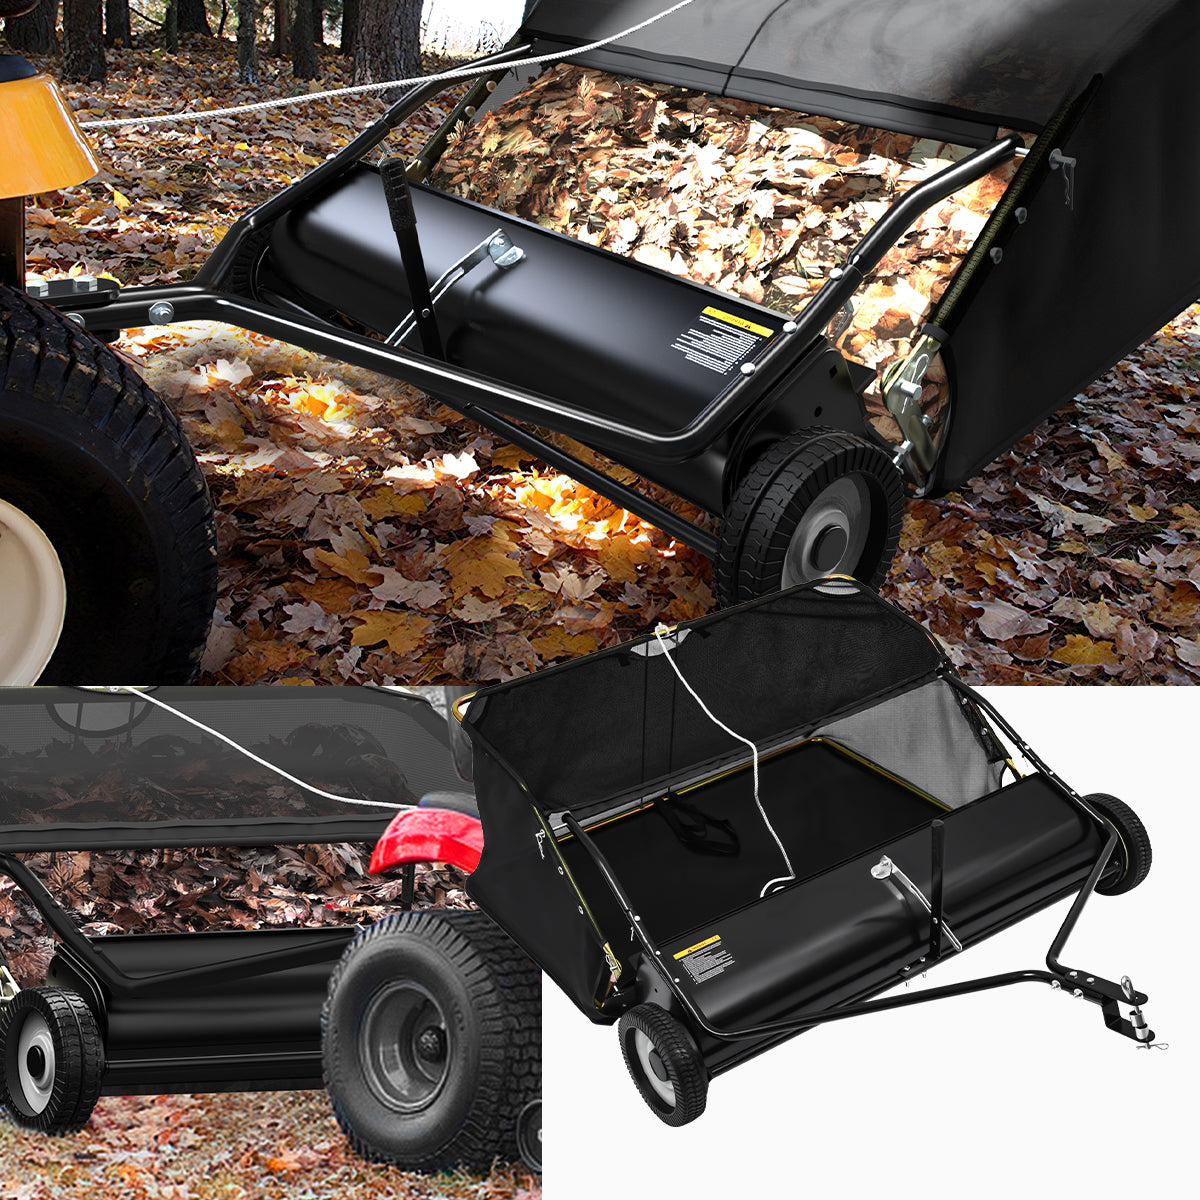 YITAMOTOR 48" Tow Behind Lawn Sweeper Leaf Collector Sweeper for Lawn